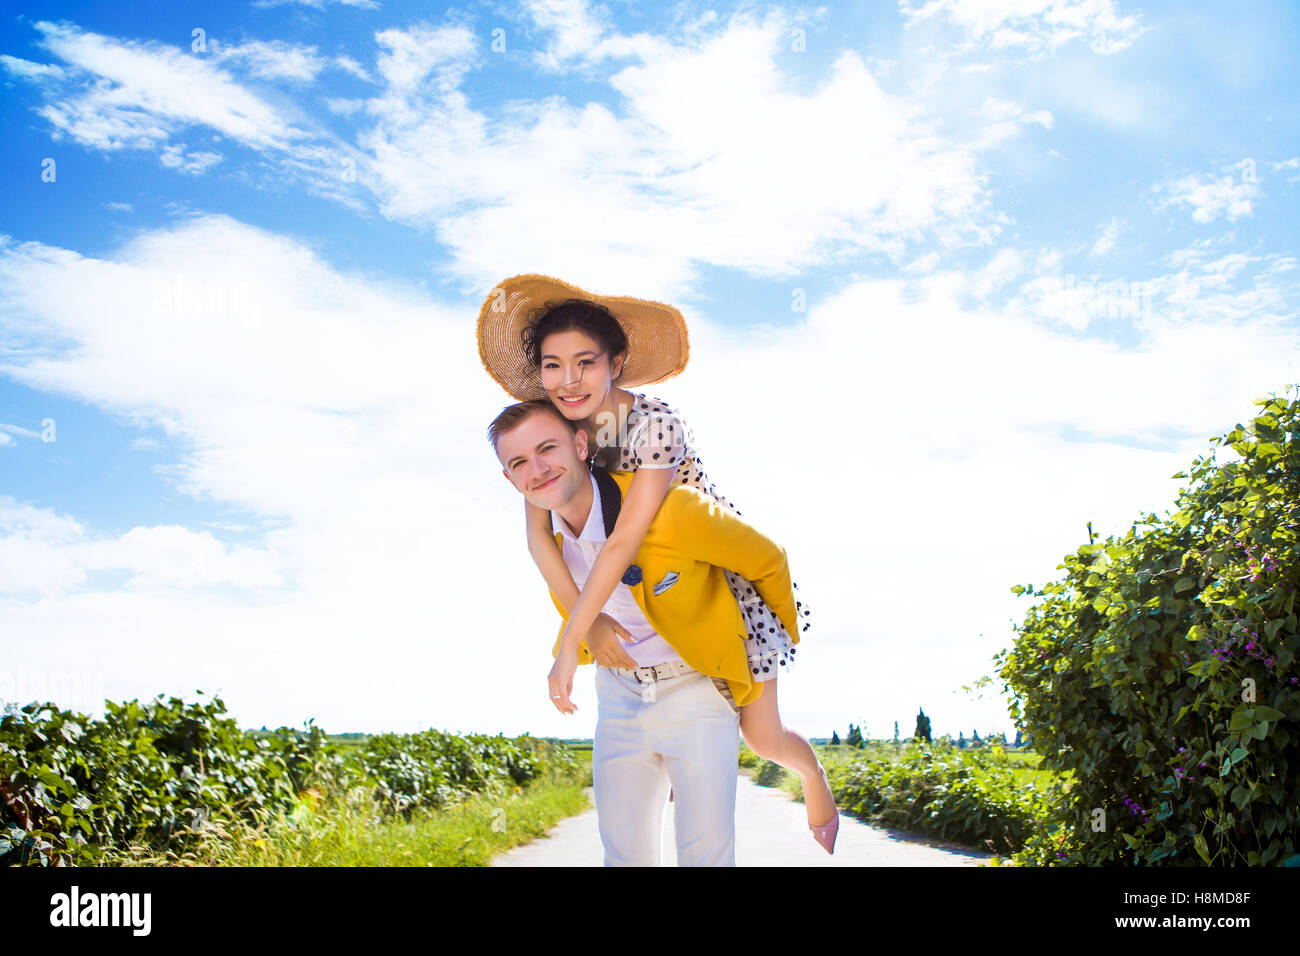 Portrait of happy man piggybacking woman on footpath amidst field against cloudy sky Stock Photo